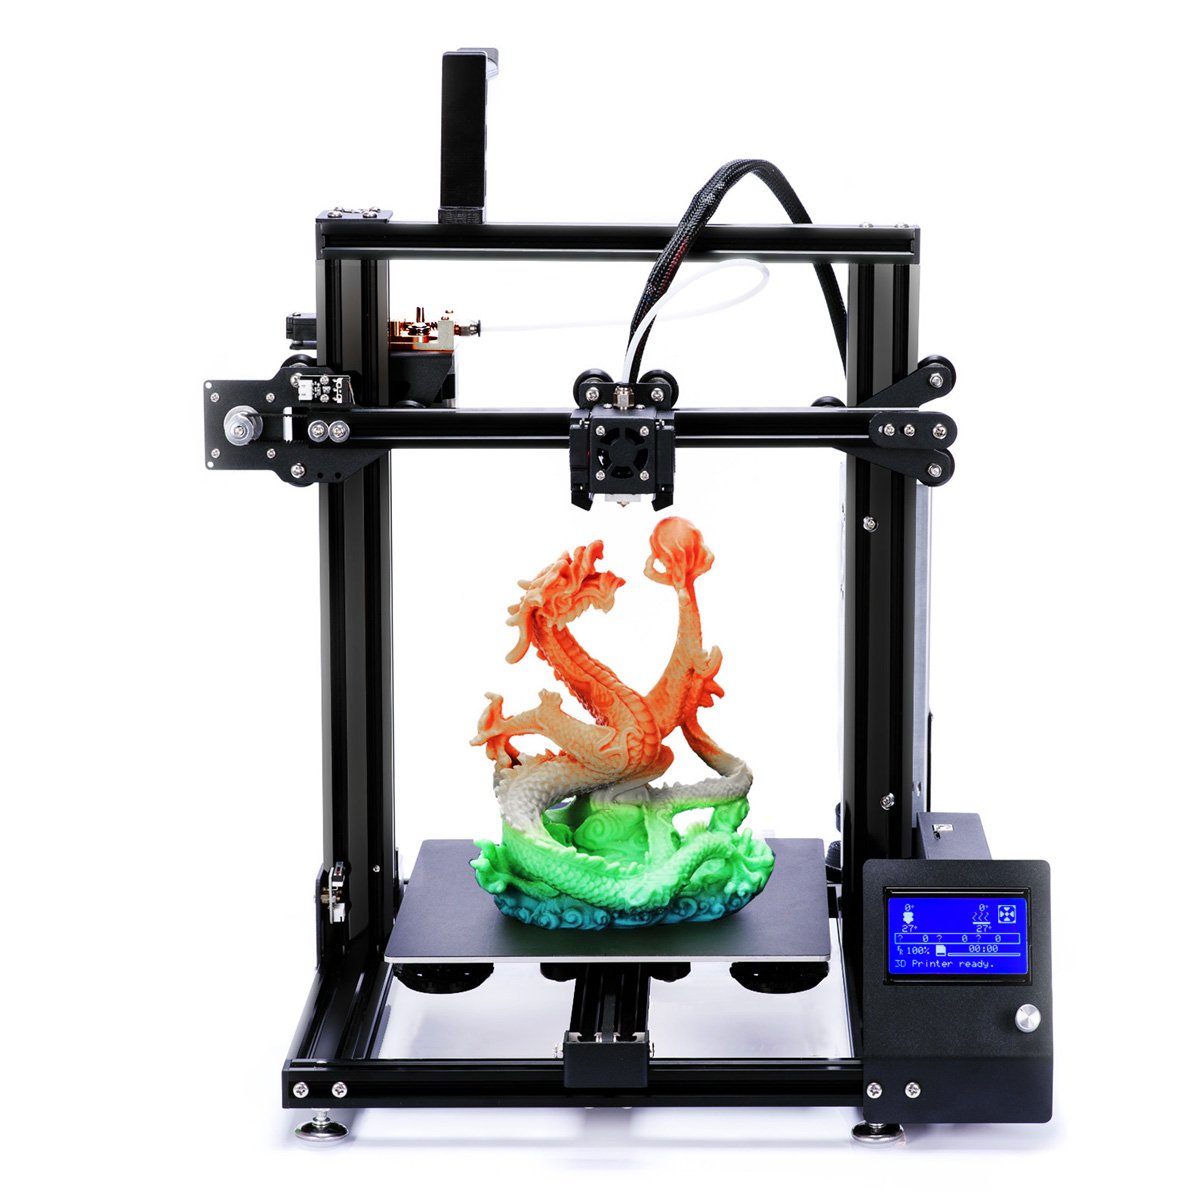 ADIMLab Gantry-S 3D Printer DIY Kit 230*230*260mm Printing Size Support Power Resume/Filament Run-out Detector w/ Metal Extruder & 3 Fans for V6 T 1